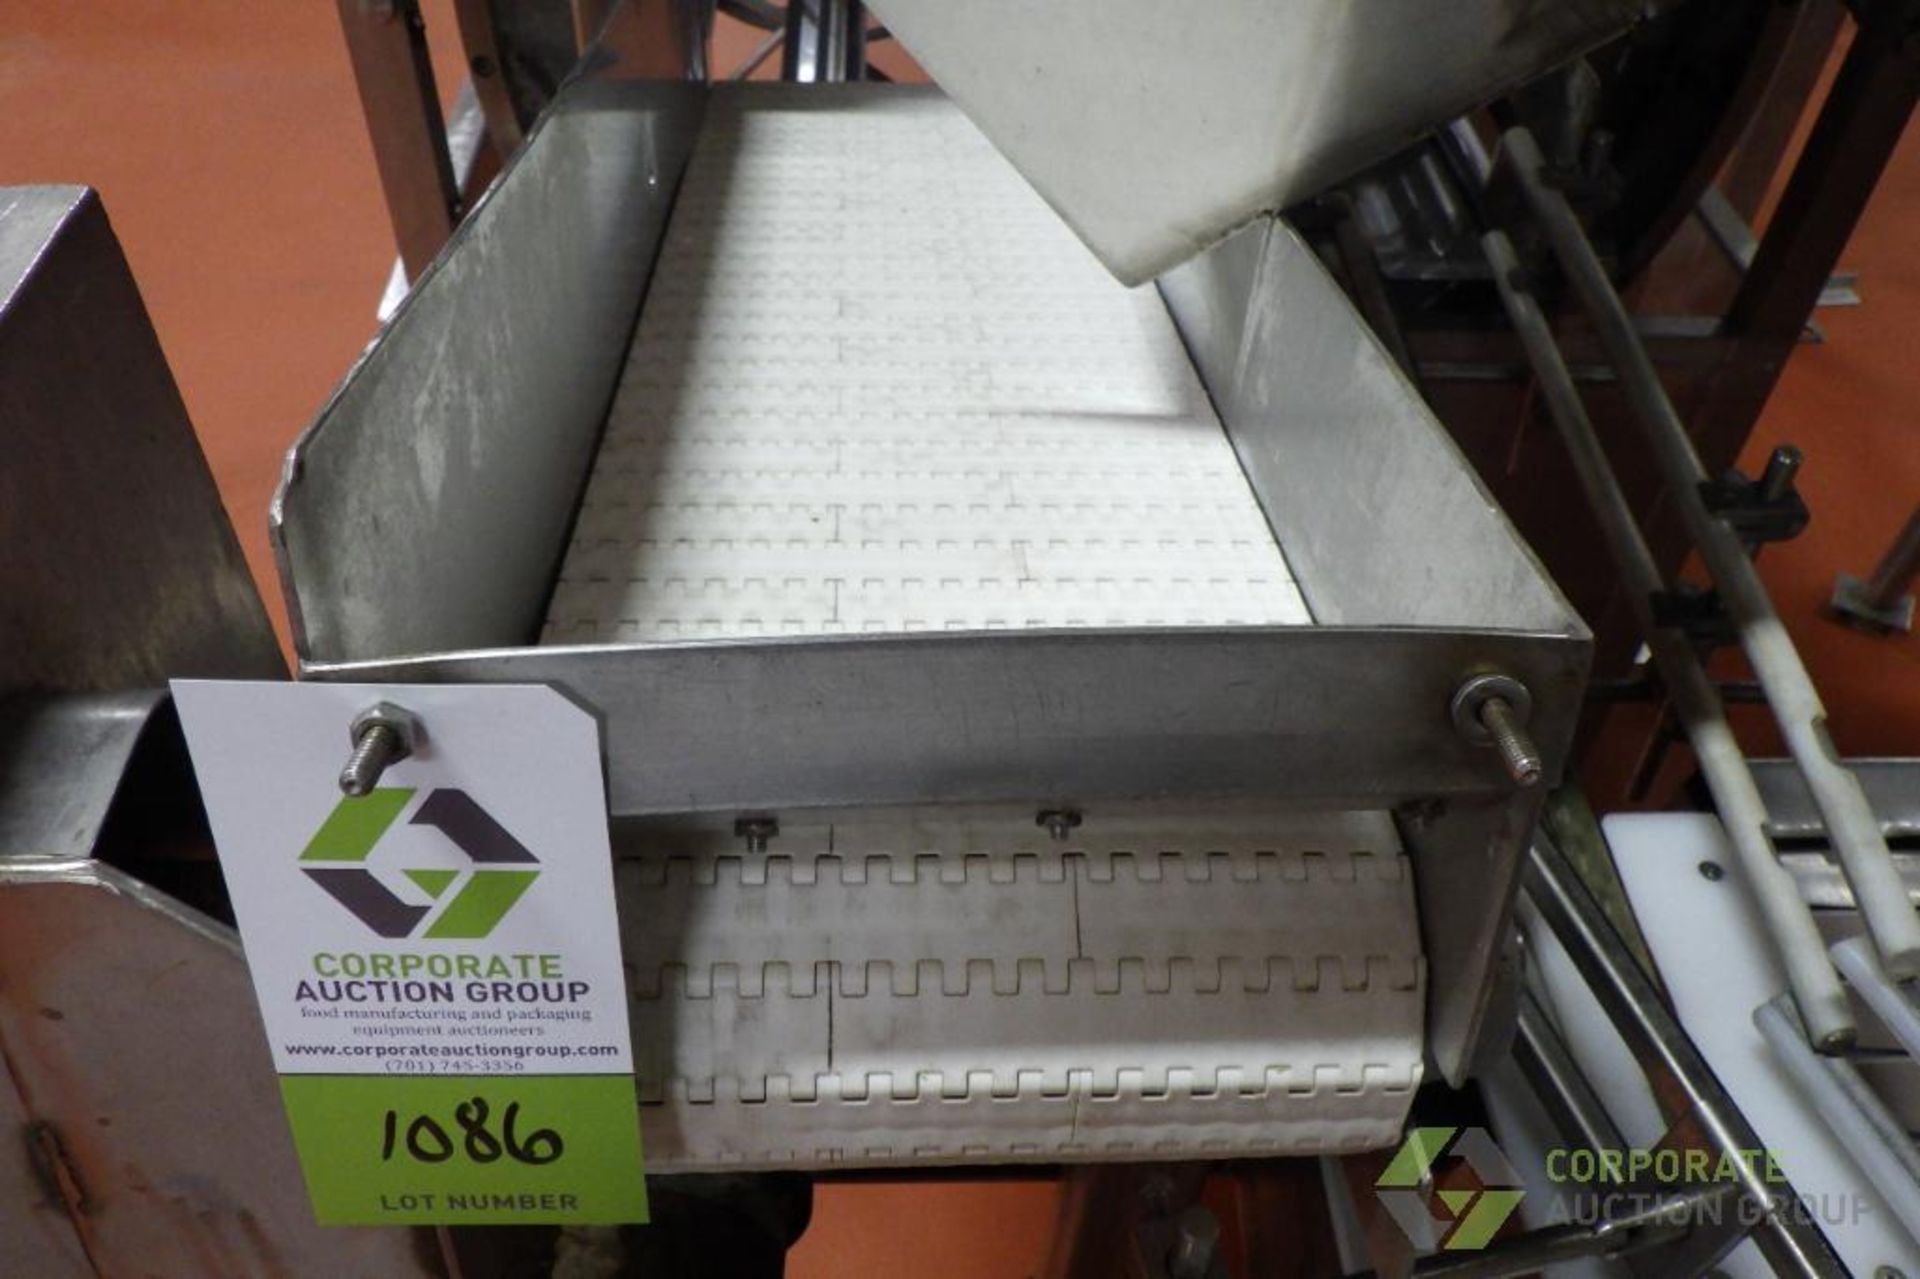 Stainless Steel Decline Conveyor, 36" L x 10" W with 46" infeed x 39" H - Image 3 of 6